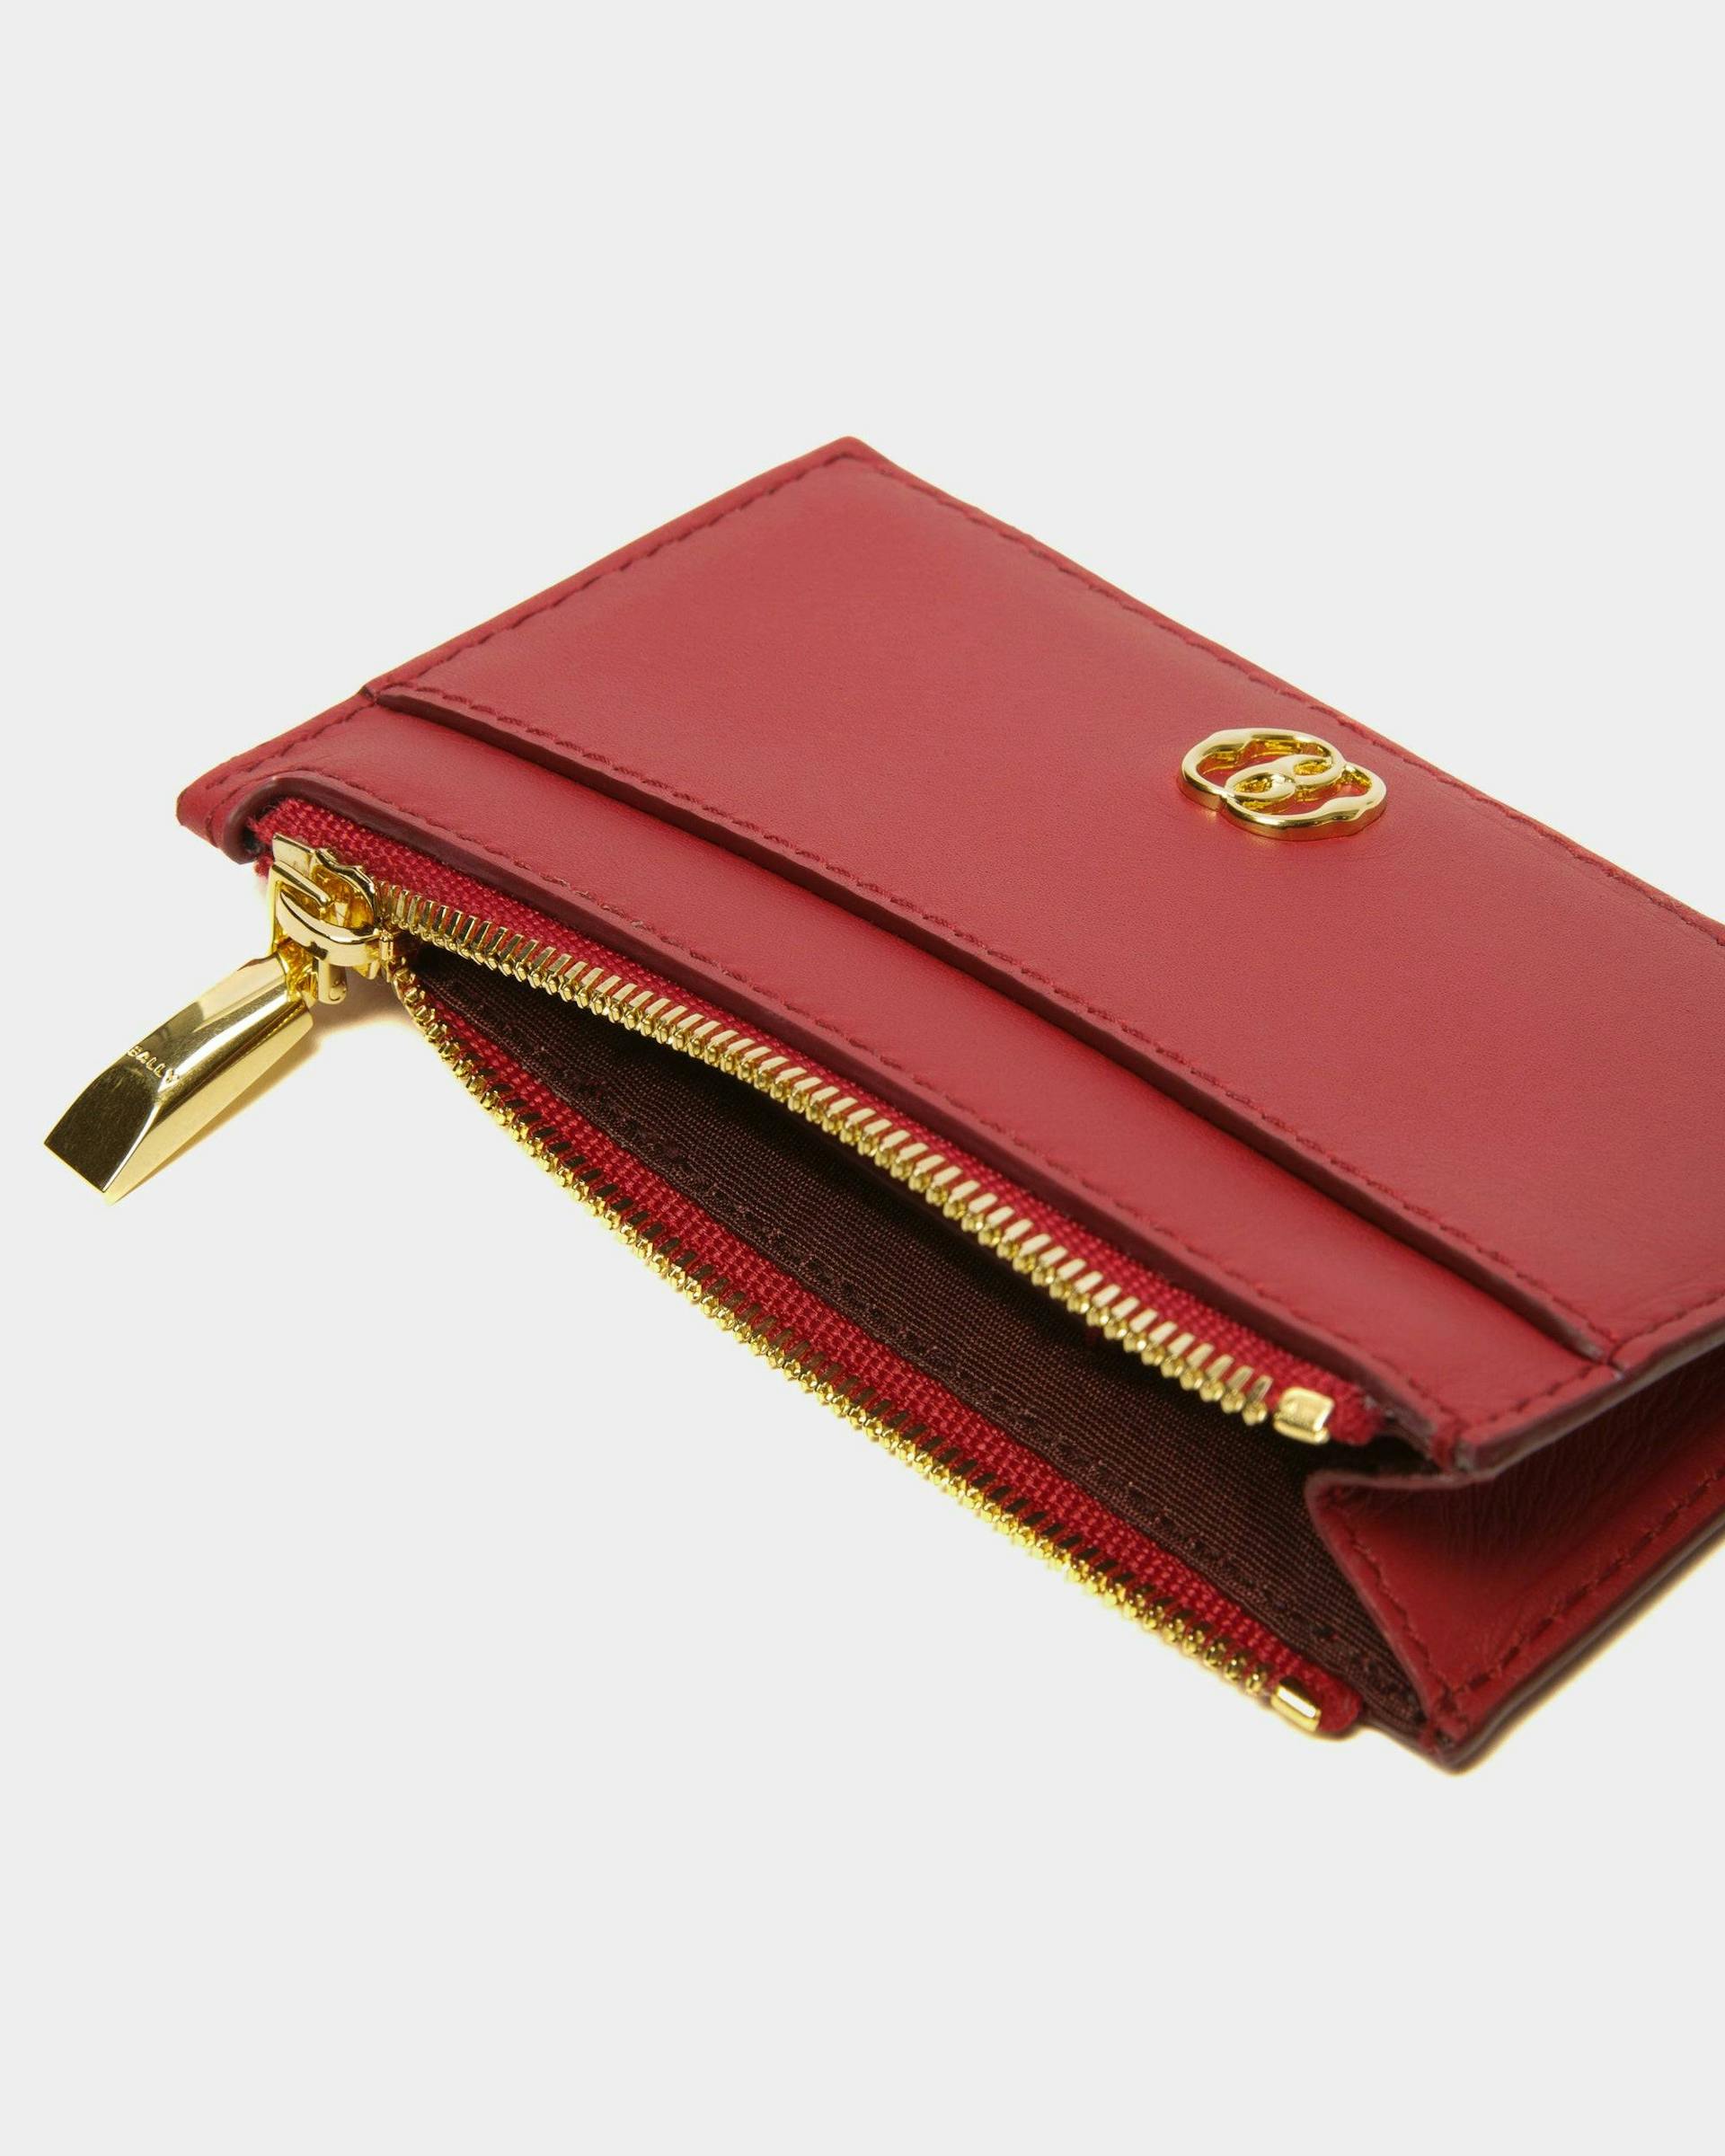 Emblem Business Card Holder In Deep Ruby Leather - Women's - Bally - 04